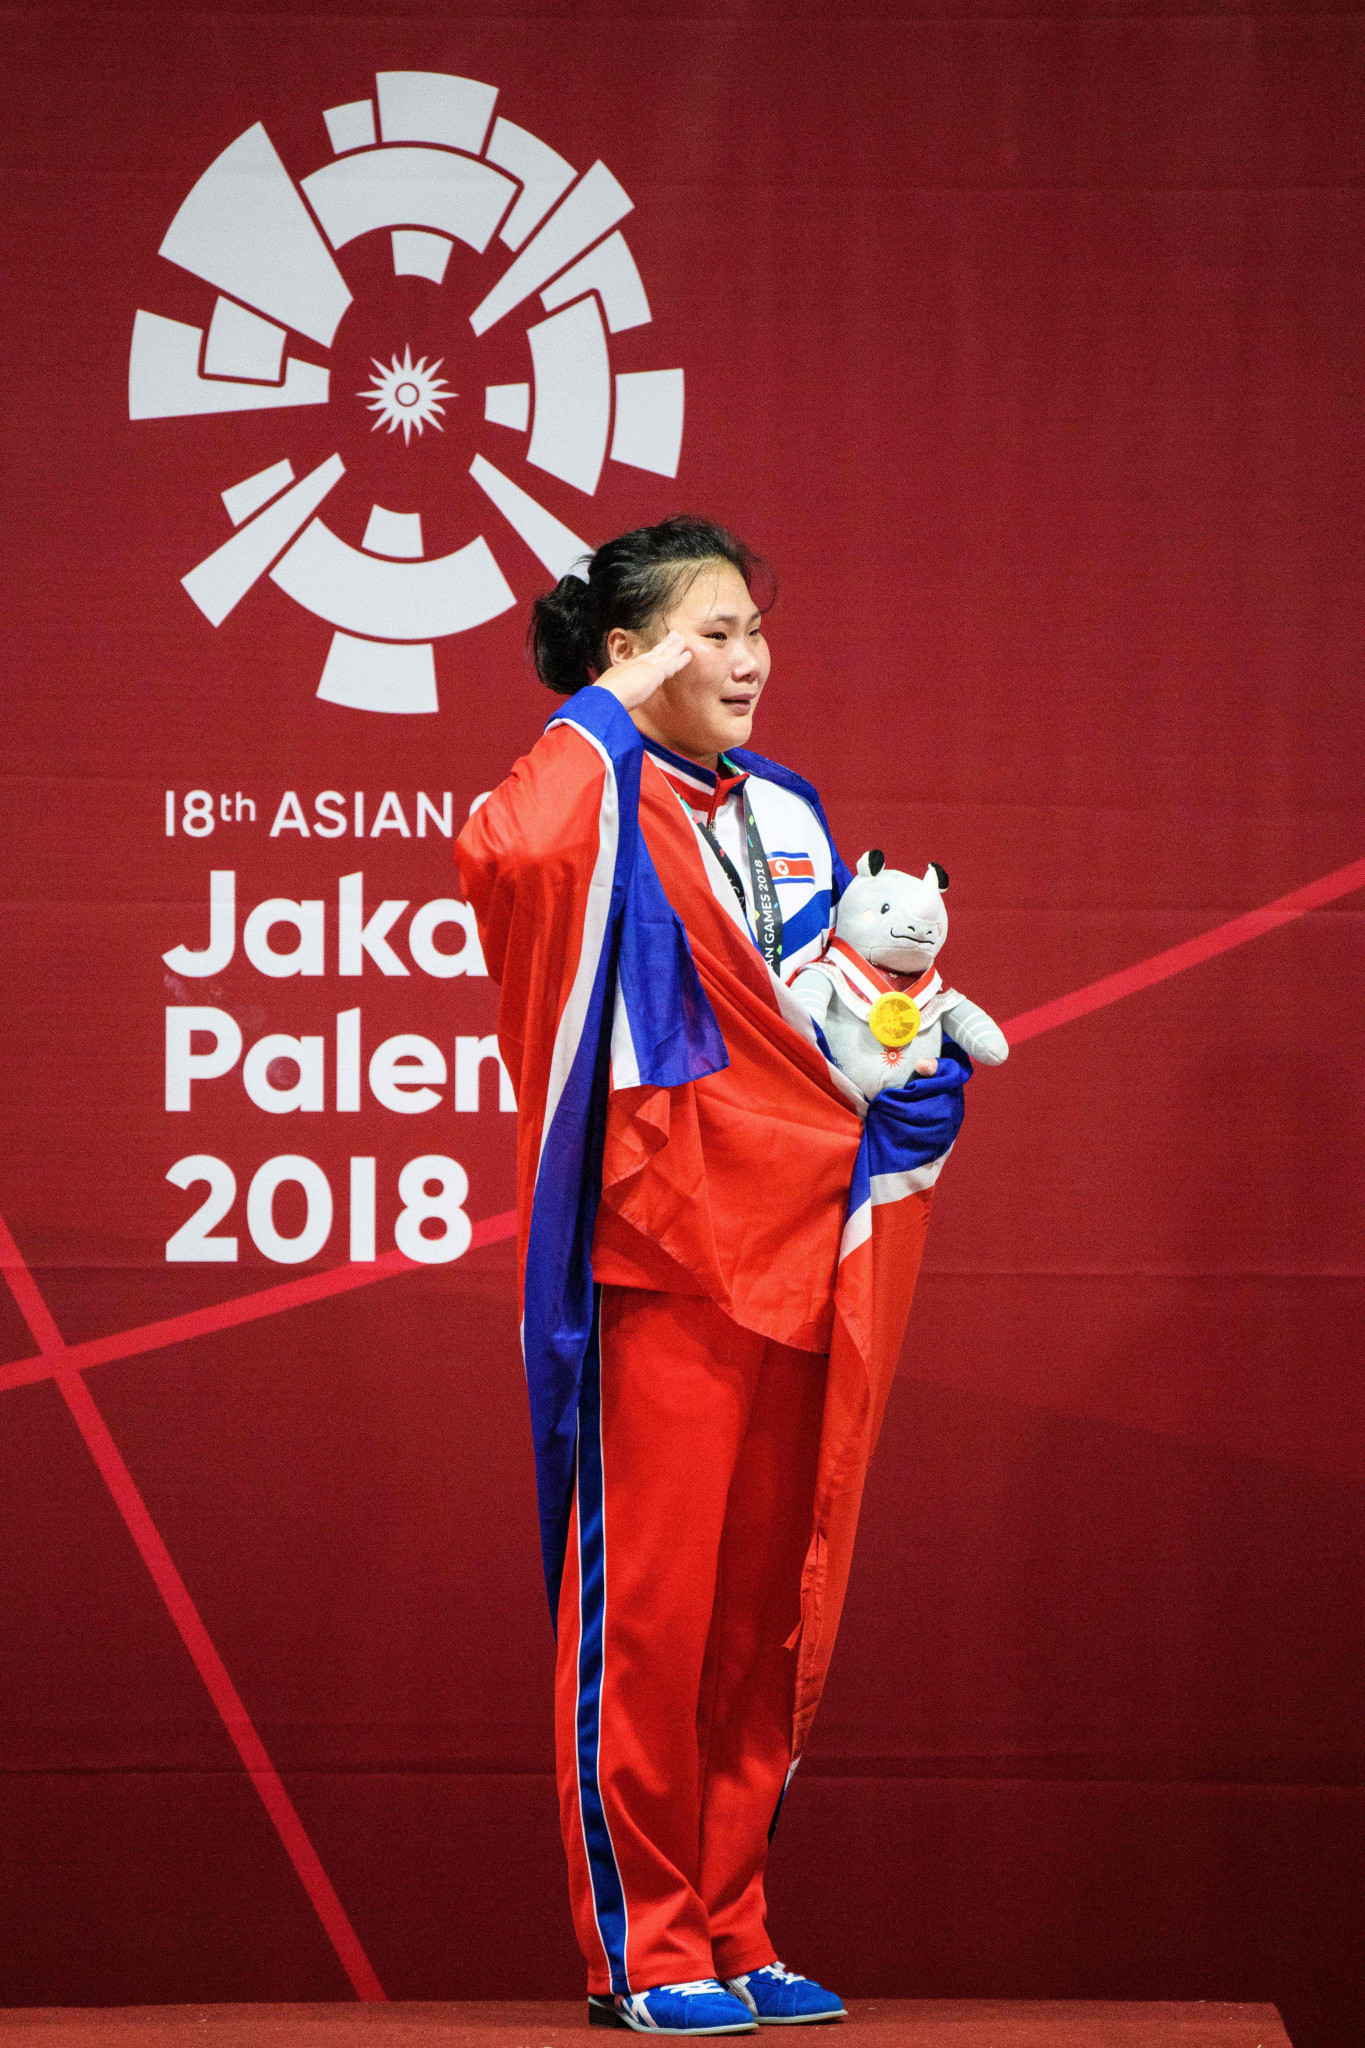 North Korea won eight of the 15 gold medals in the last Asian Games at Jakarta Palembang 2018 in the absence of China but are an unknown quantity this time round ©Getty Images